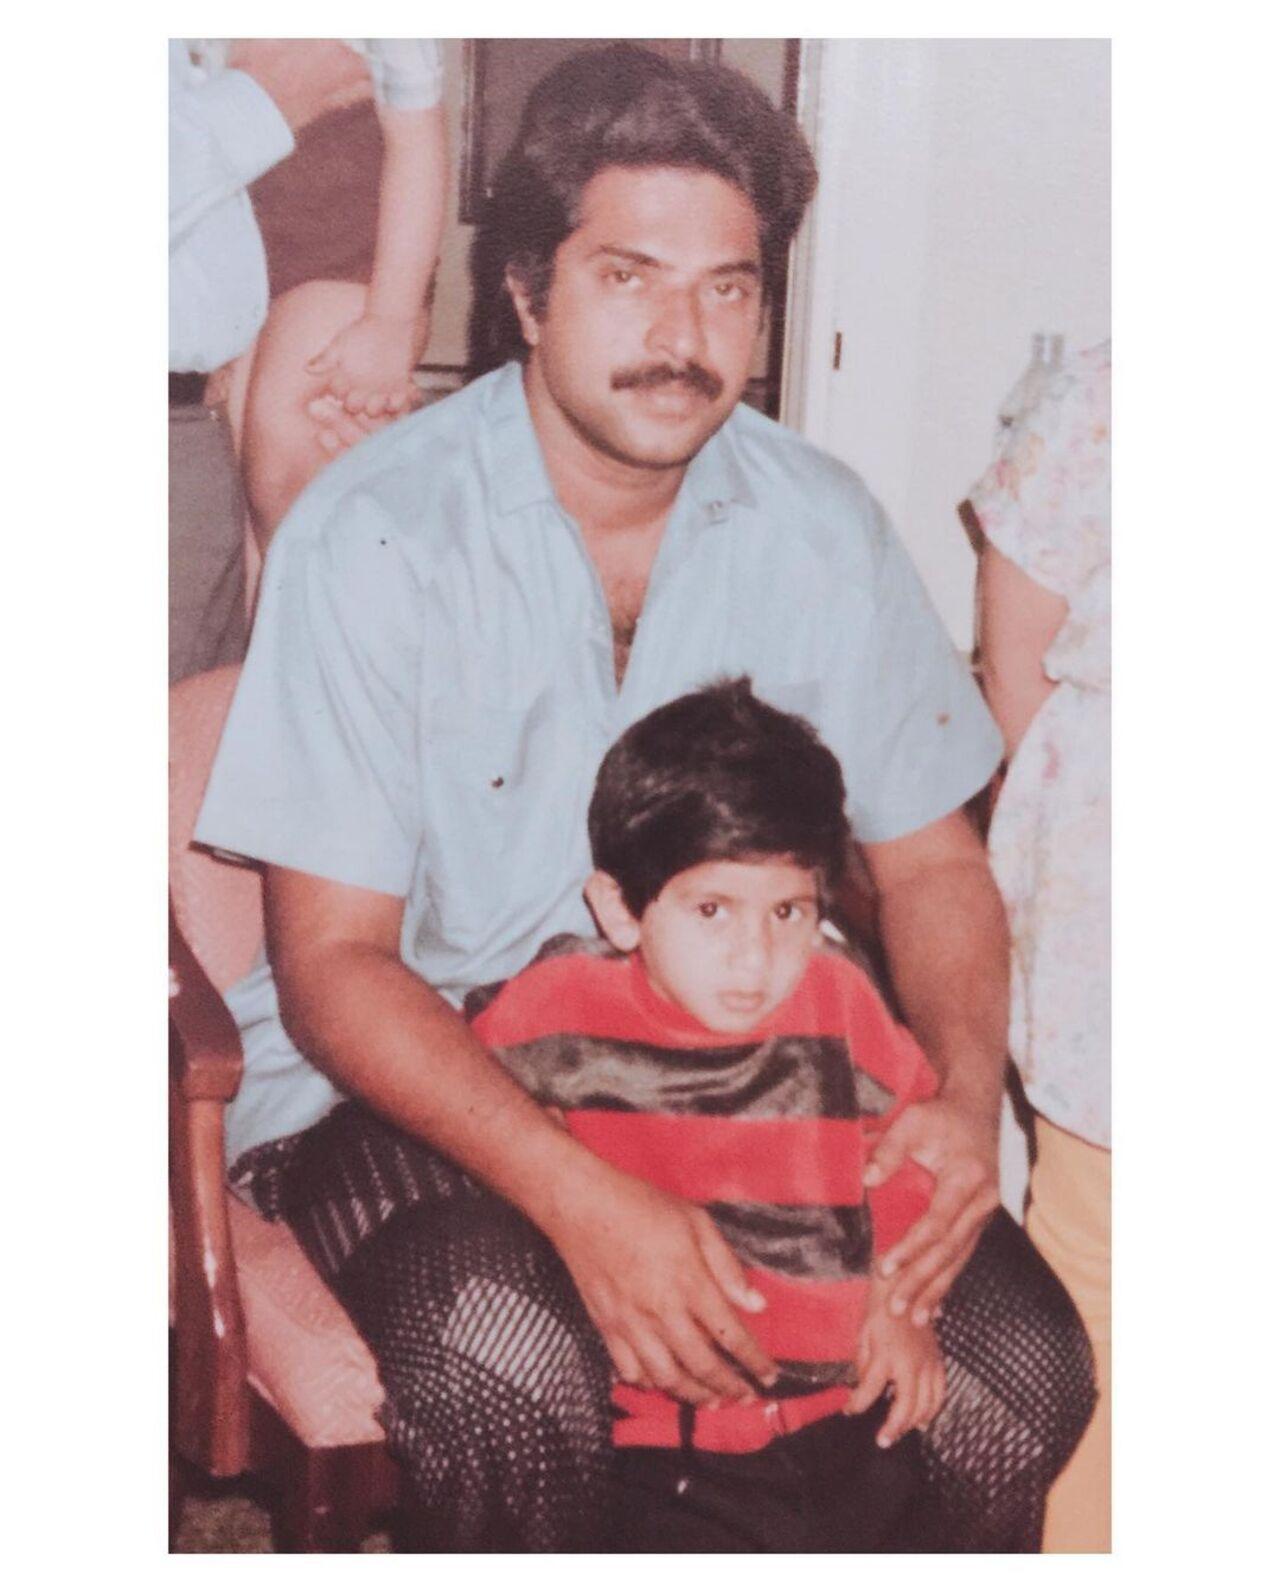 Mammootty with a young Dulquer Salmaan. The picture was posted by the Bangalore Days star on his social media